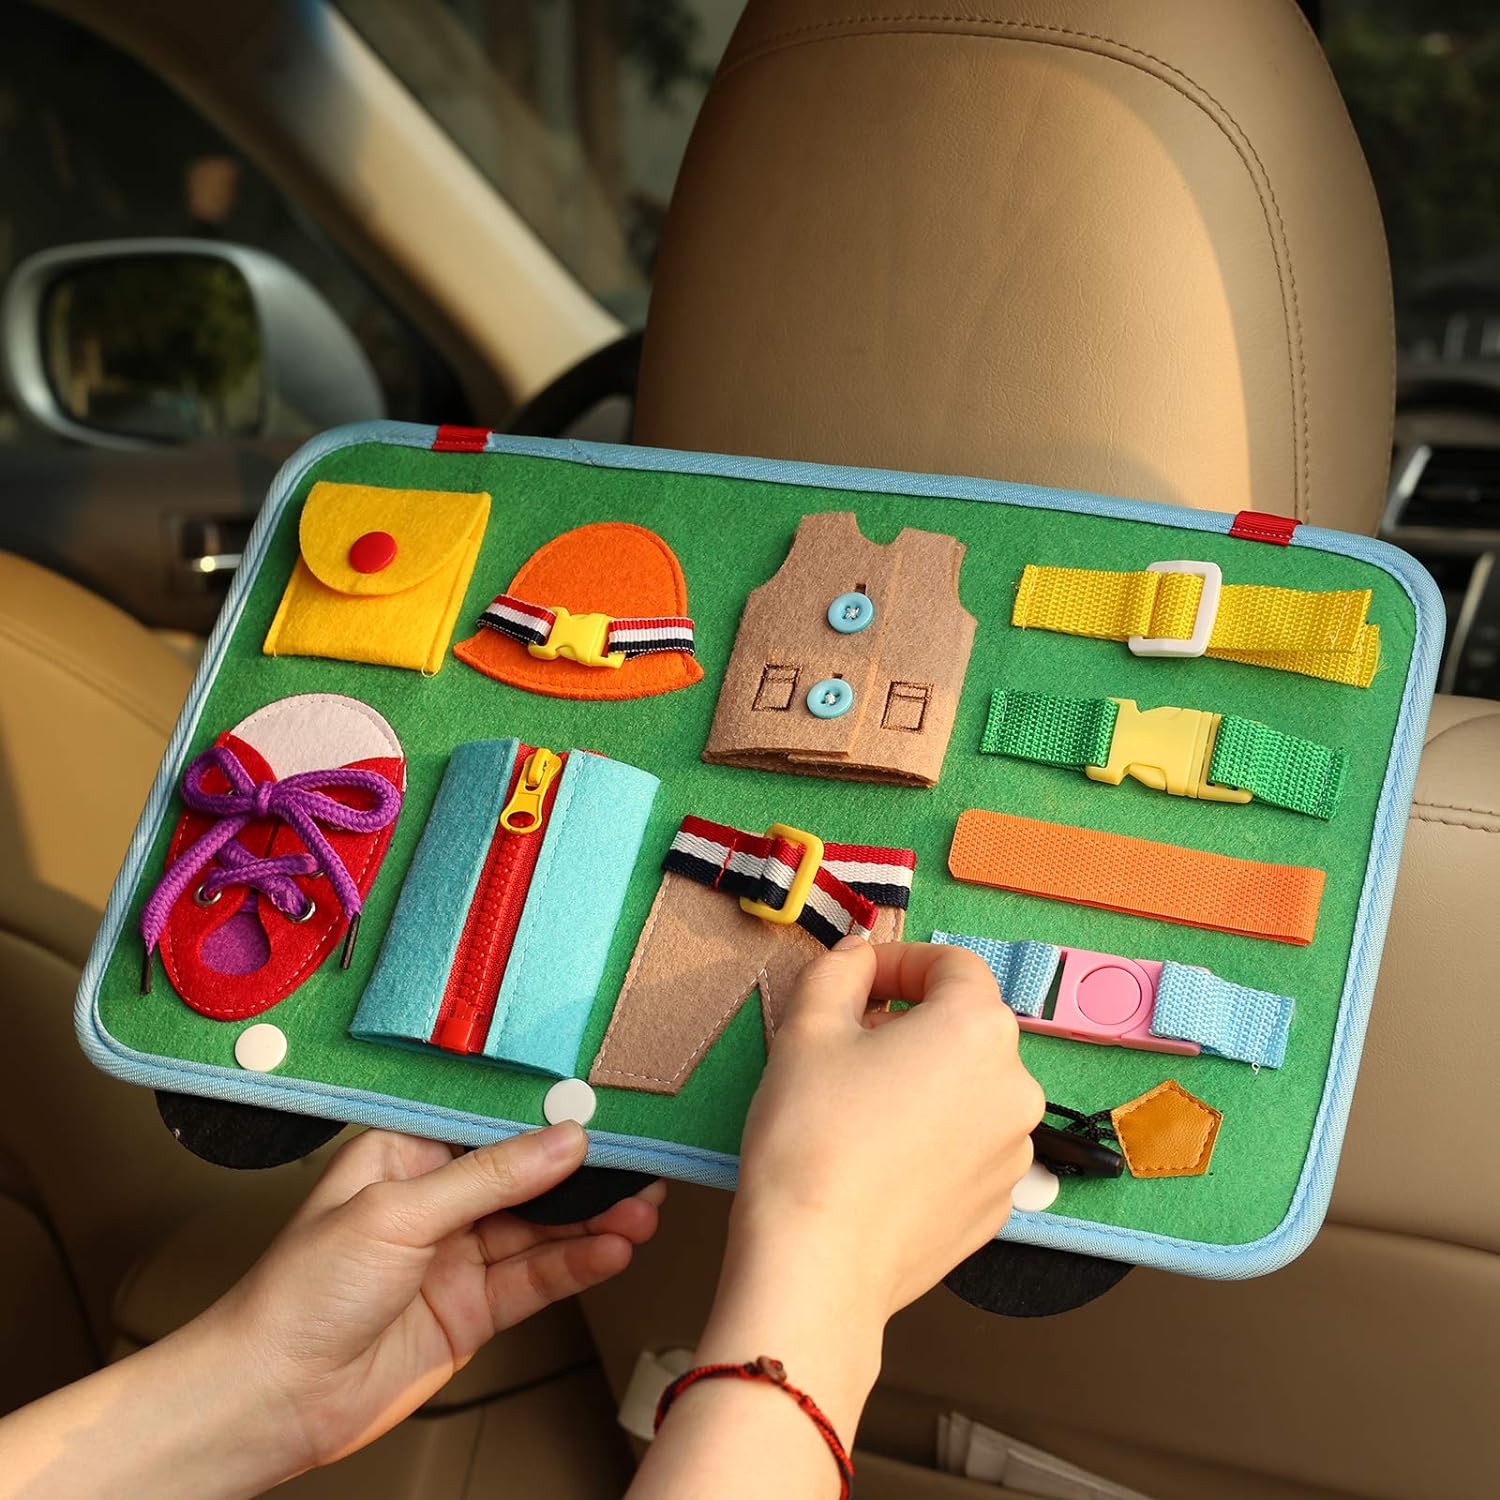 Toddler Busy Board, 14 in 1 Activity Board(Garbage Car Style), Montessori Sensory Toy for Fine Motor Skills, Learning Toy for Airplane or Car Travel, Preschool Educational Gift for Kids Boys Girls